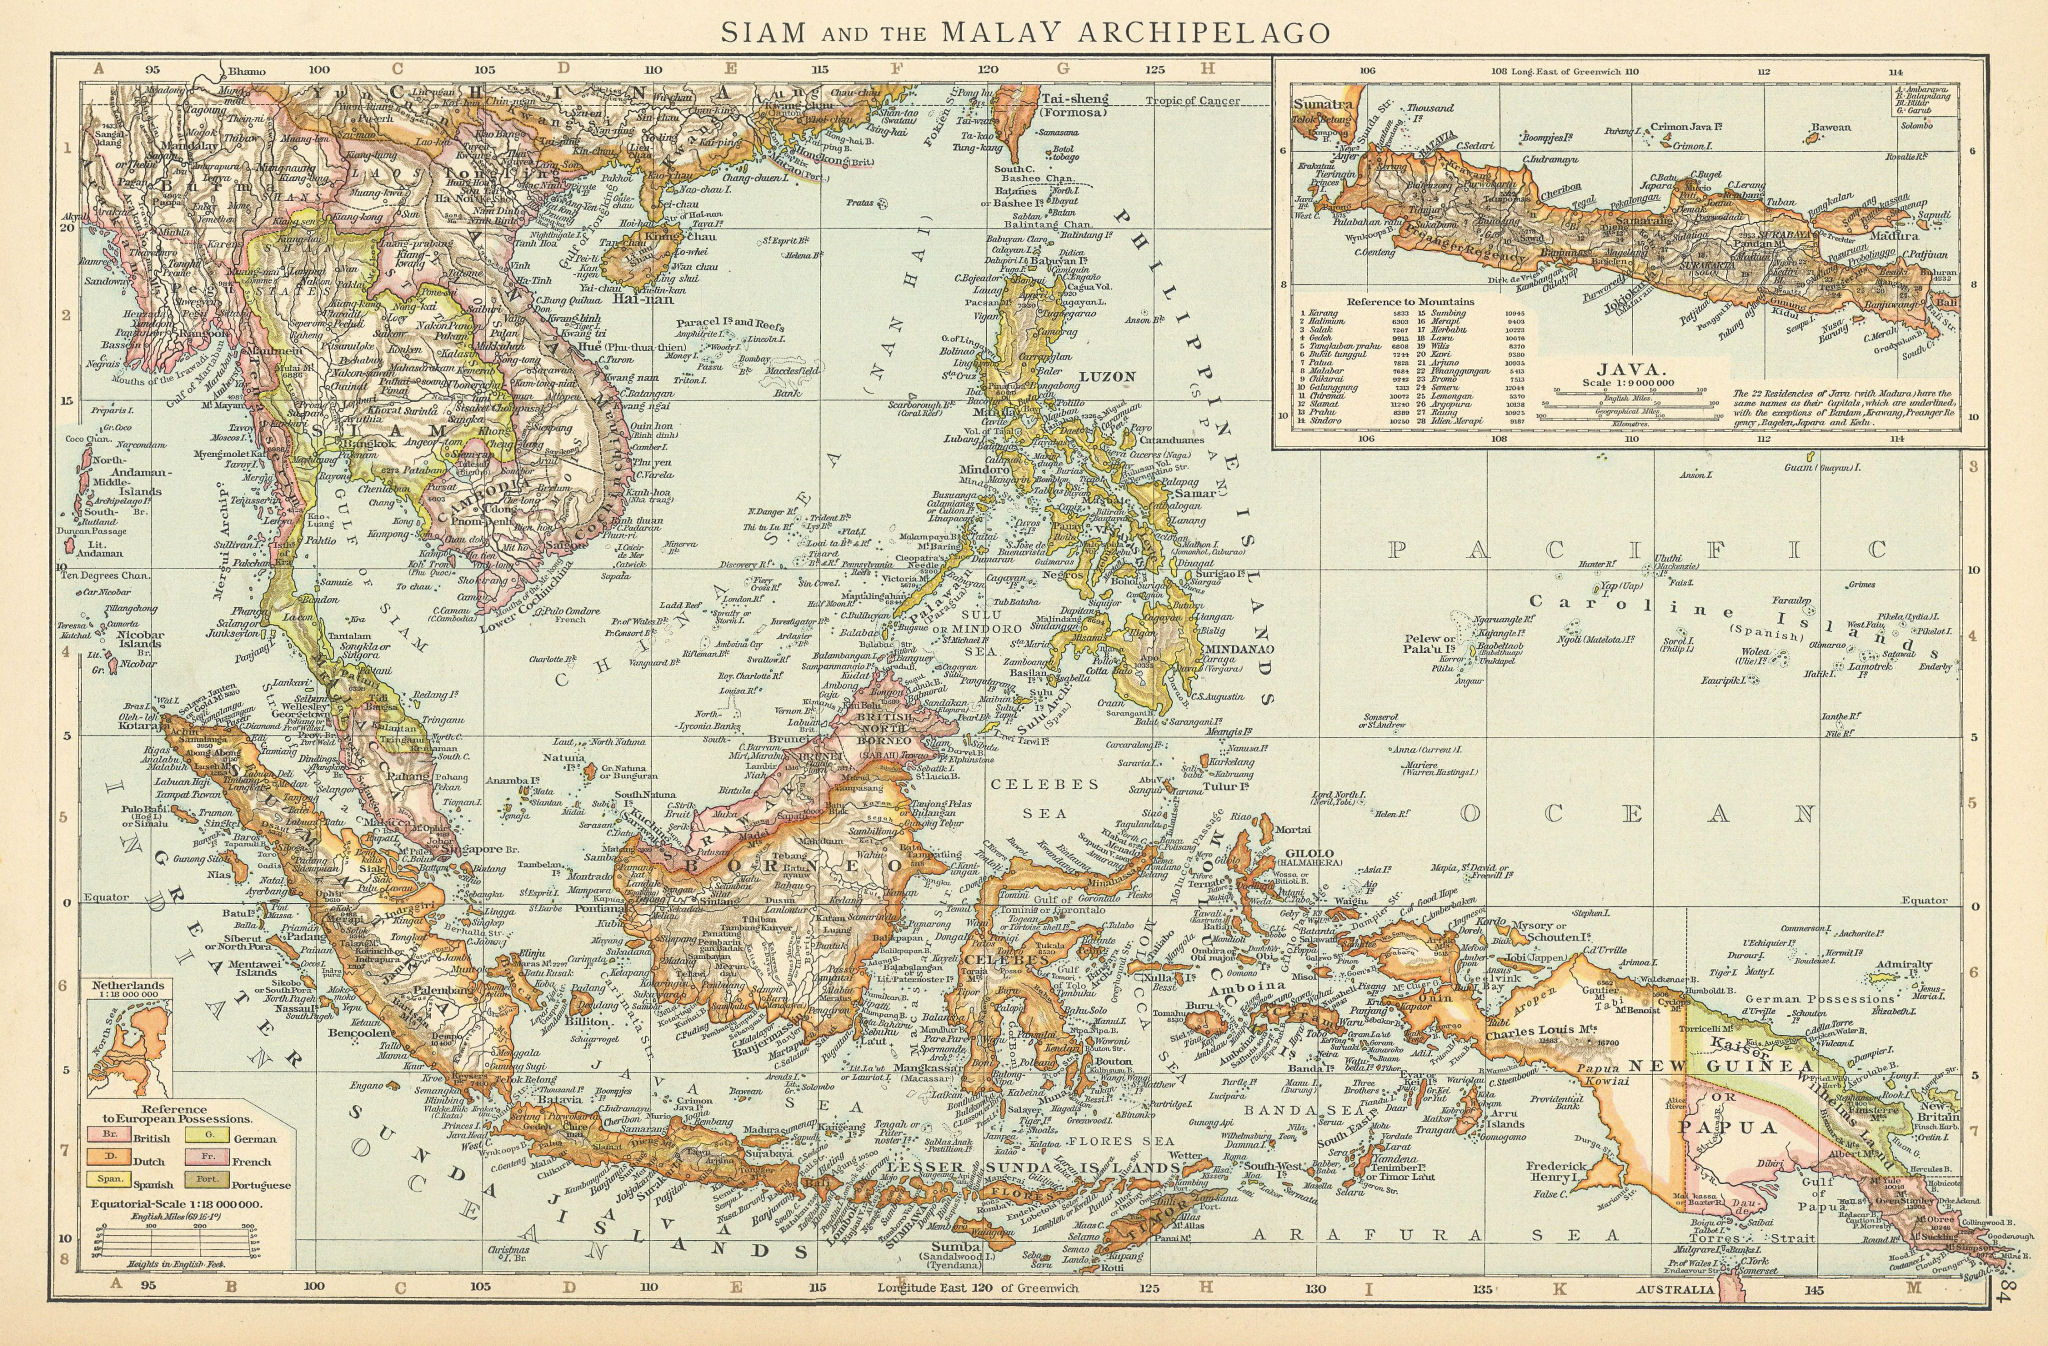 Associate Product Siam and the Malay Archipelago. Indonesia Indochina Philippines. TIMES 1895 map